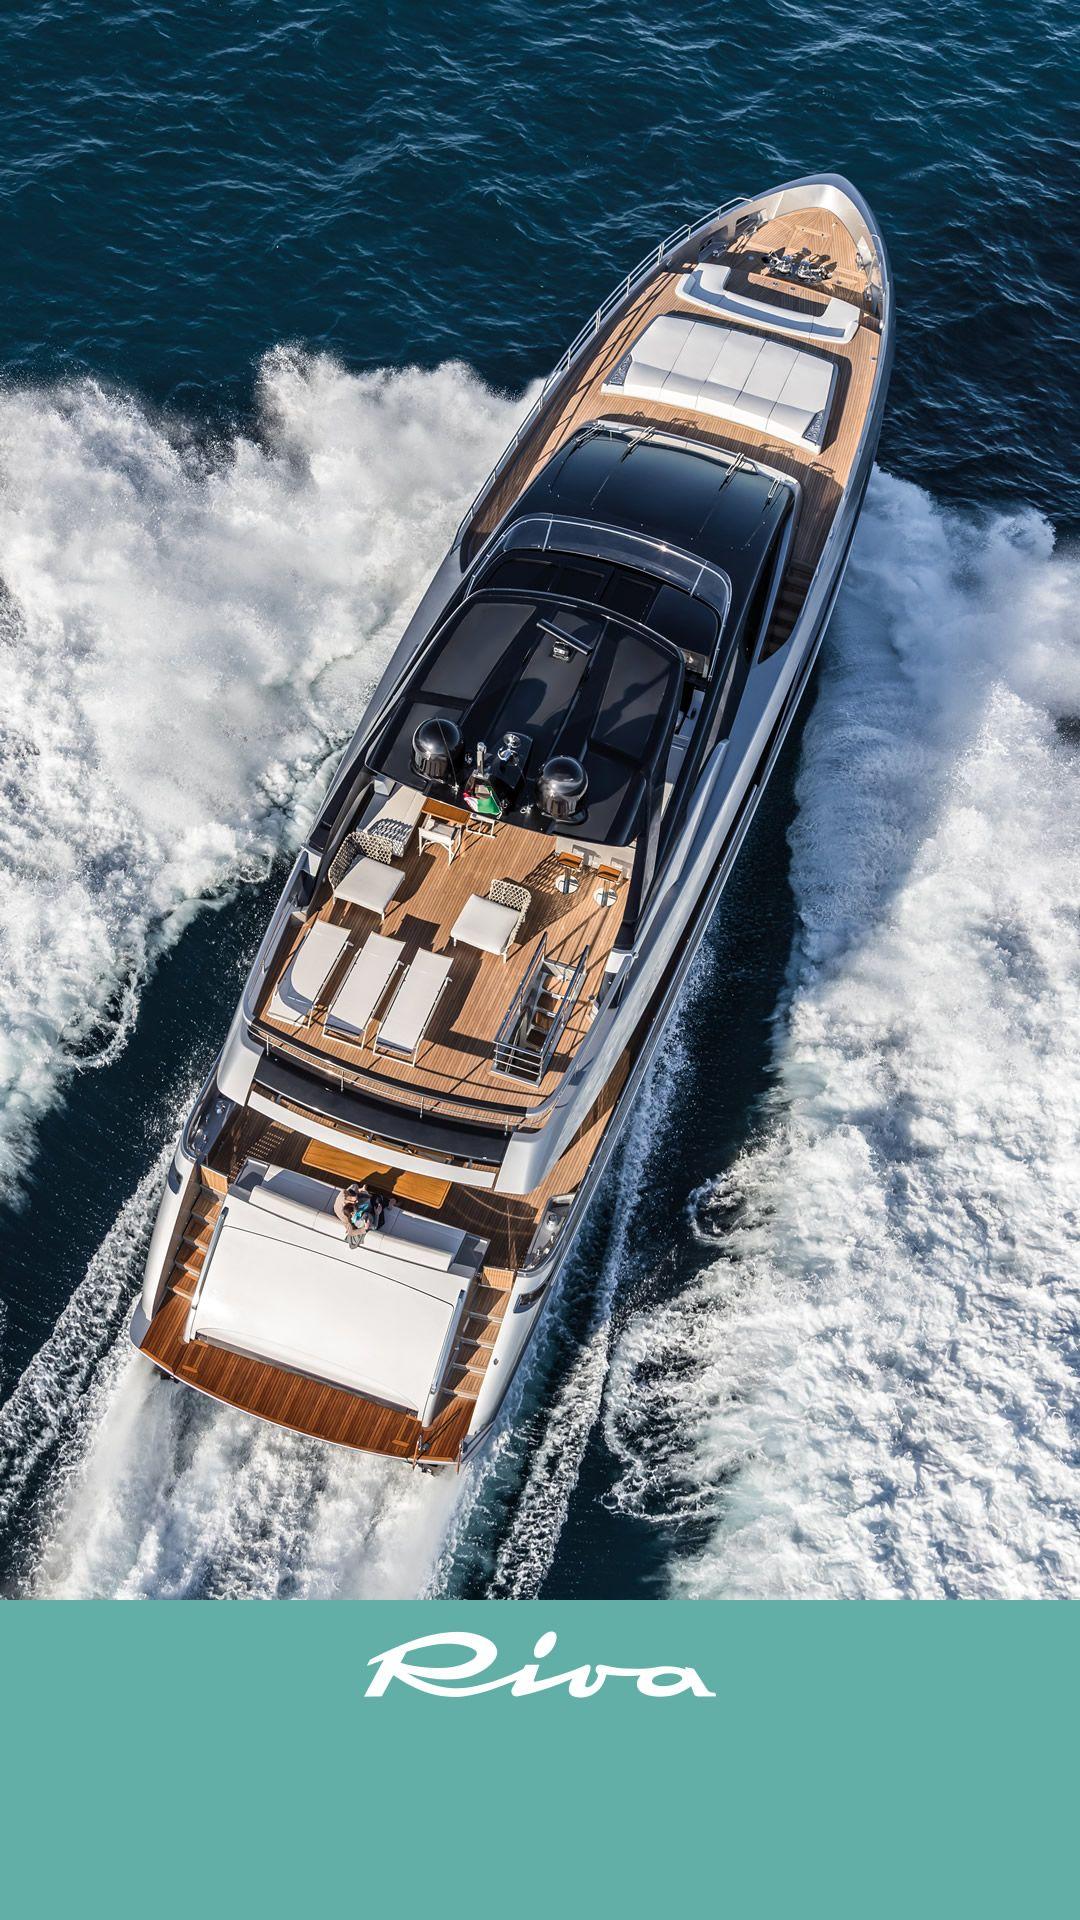 Yacht, Iphone Wallpapers